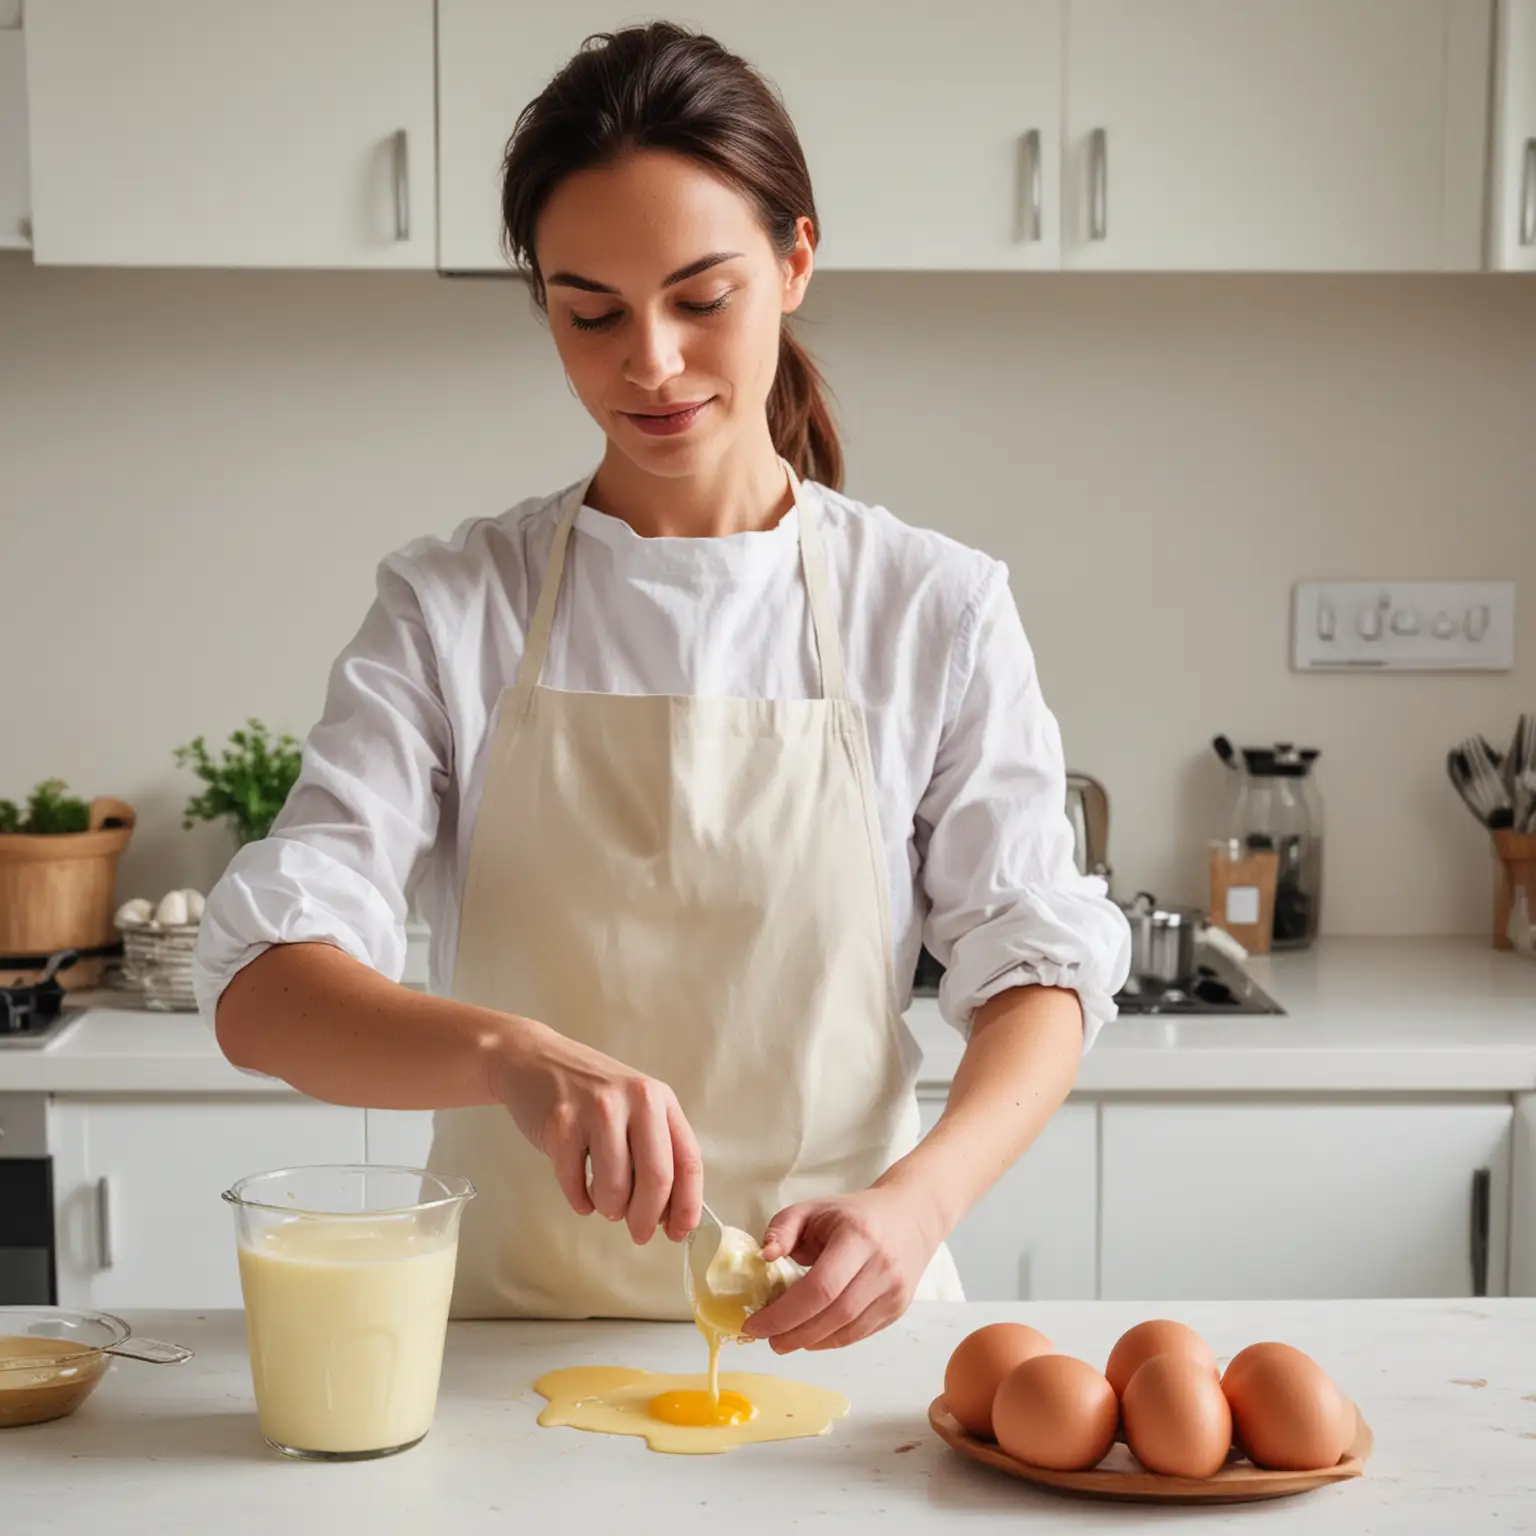 Woman-Making-Mayonnaise-from-Eggs-in-a-Bright-White-Kitchen